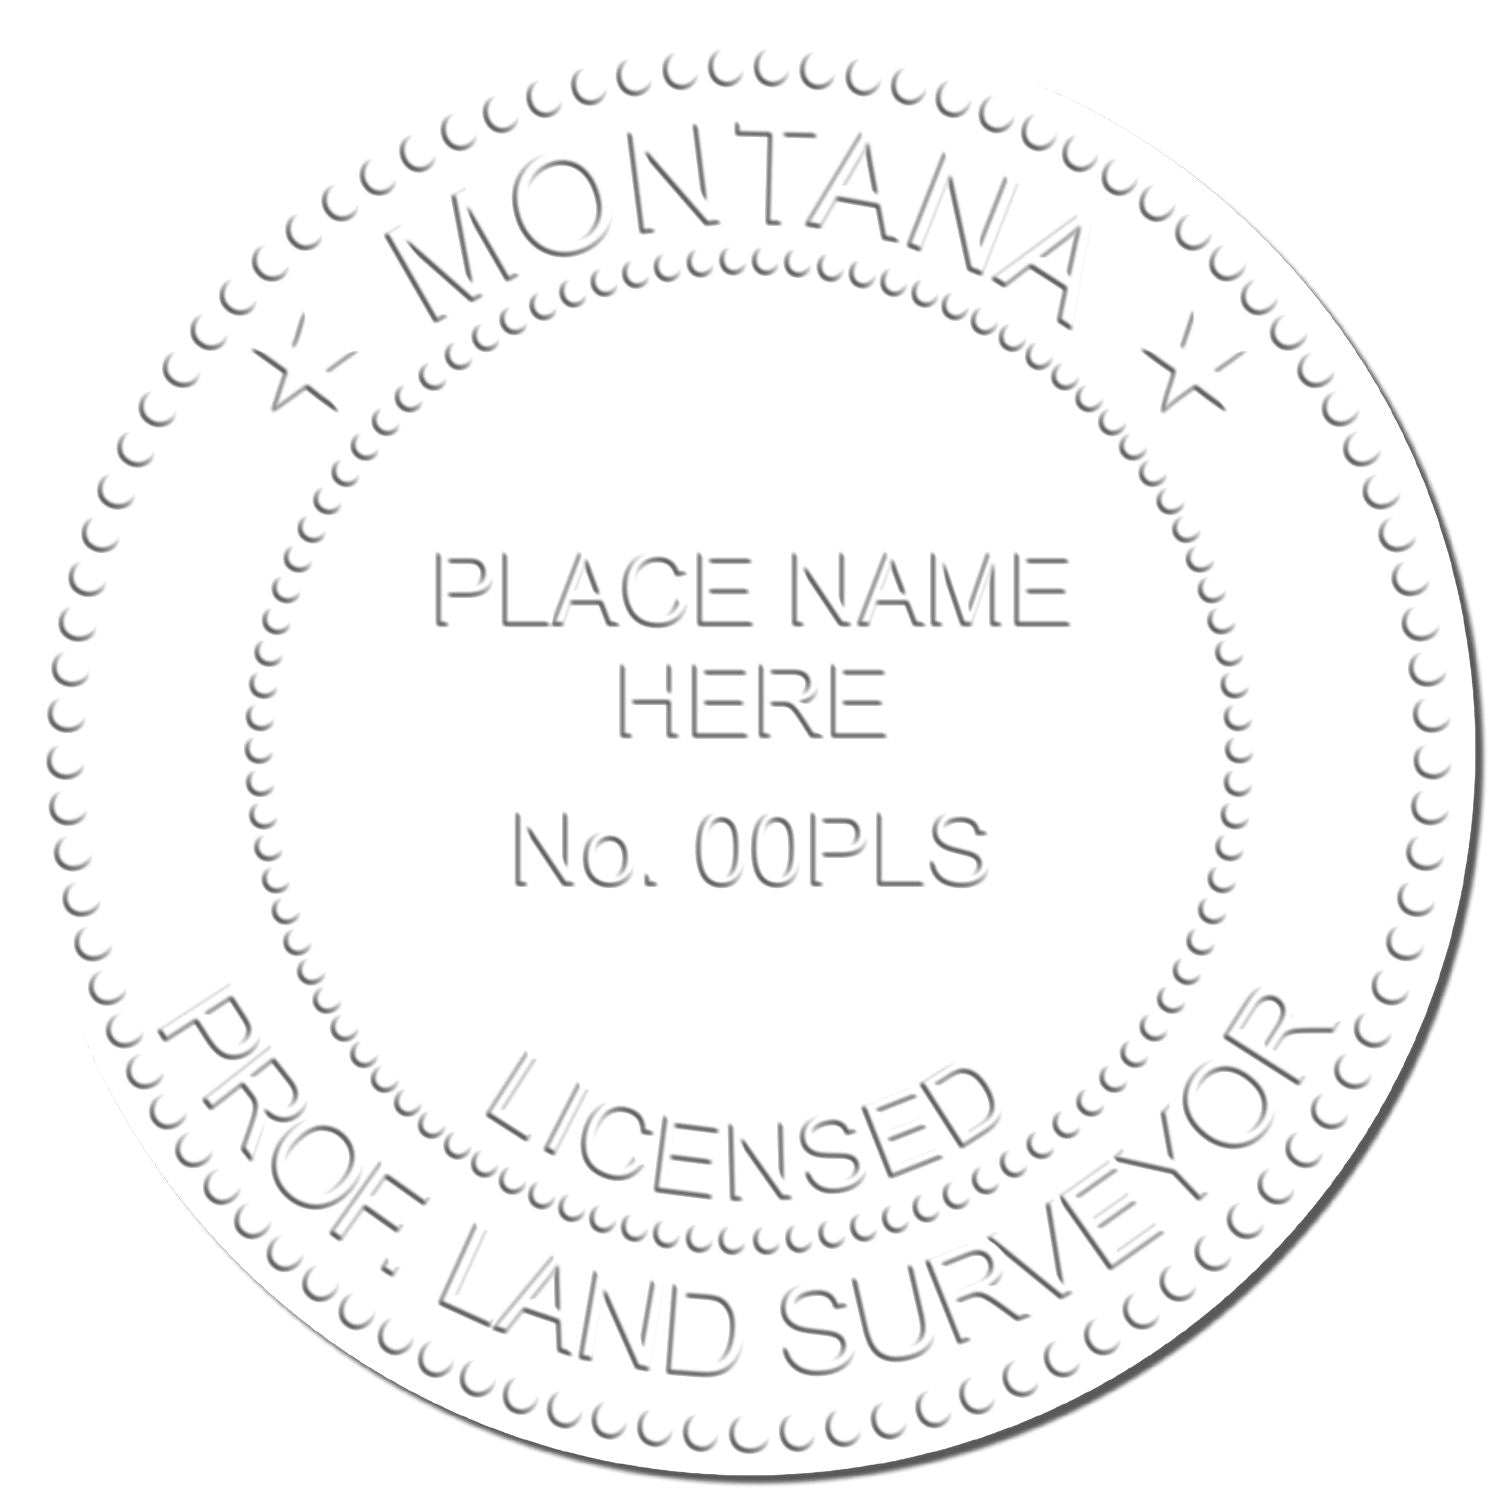 The main image for the Long Reach Montana Land Surveyor Seal depicting a sample of the imprint and electronic files